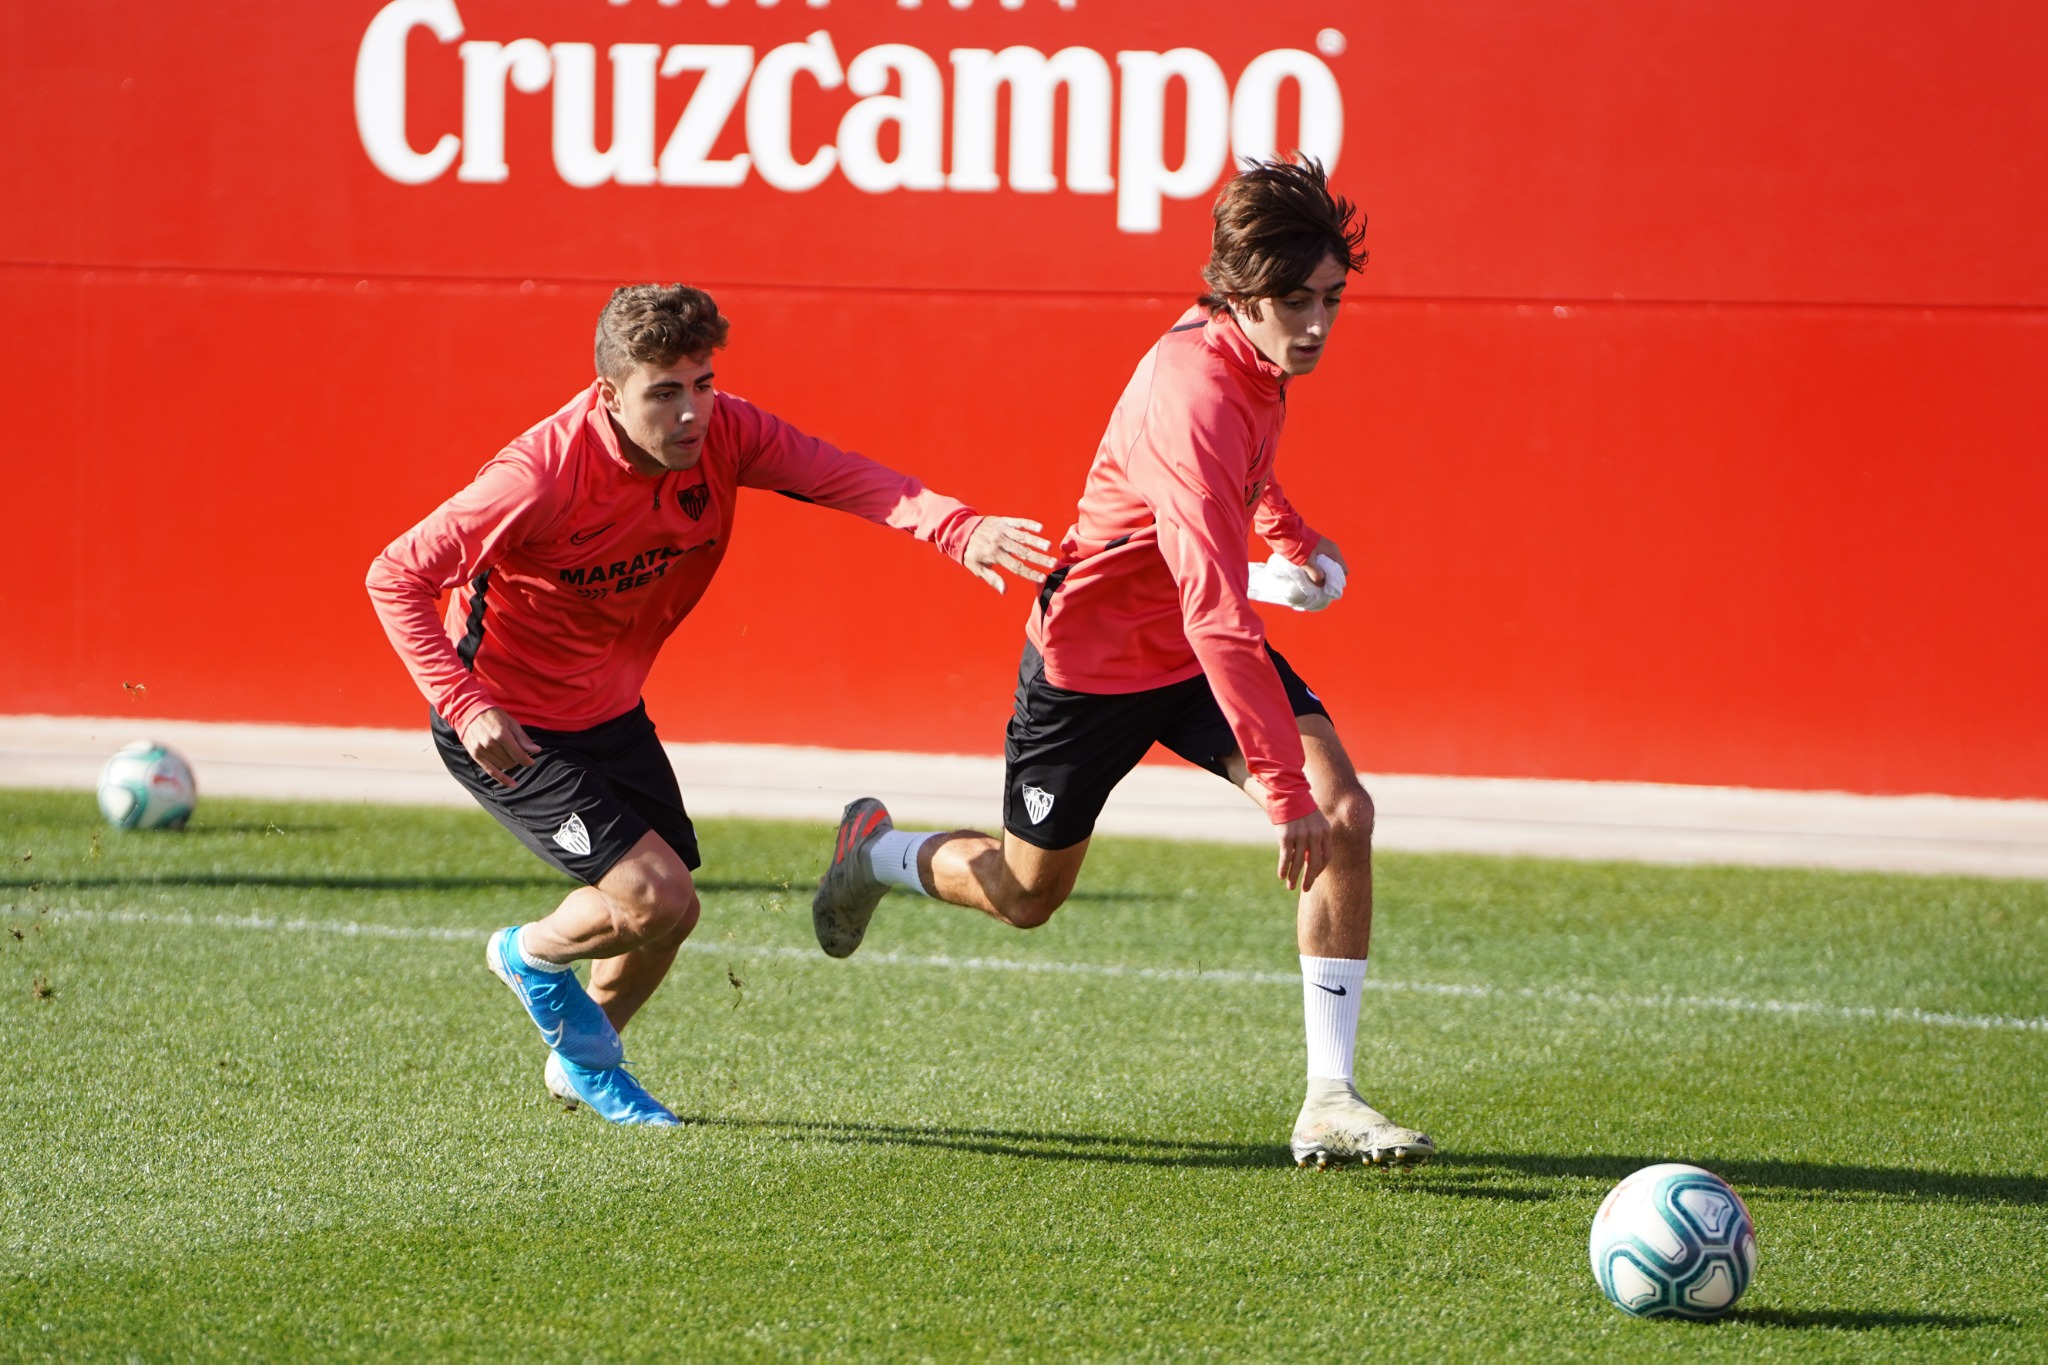 Bryan and Pozo battle for the ball during training